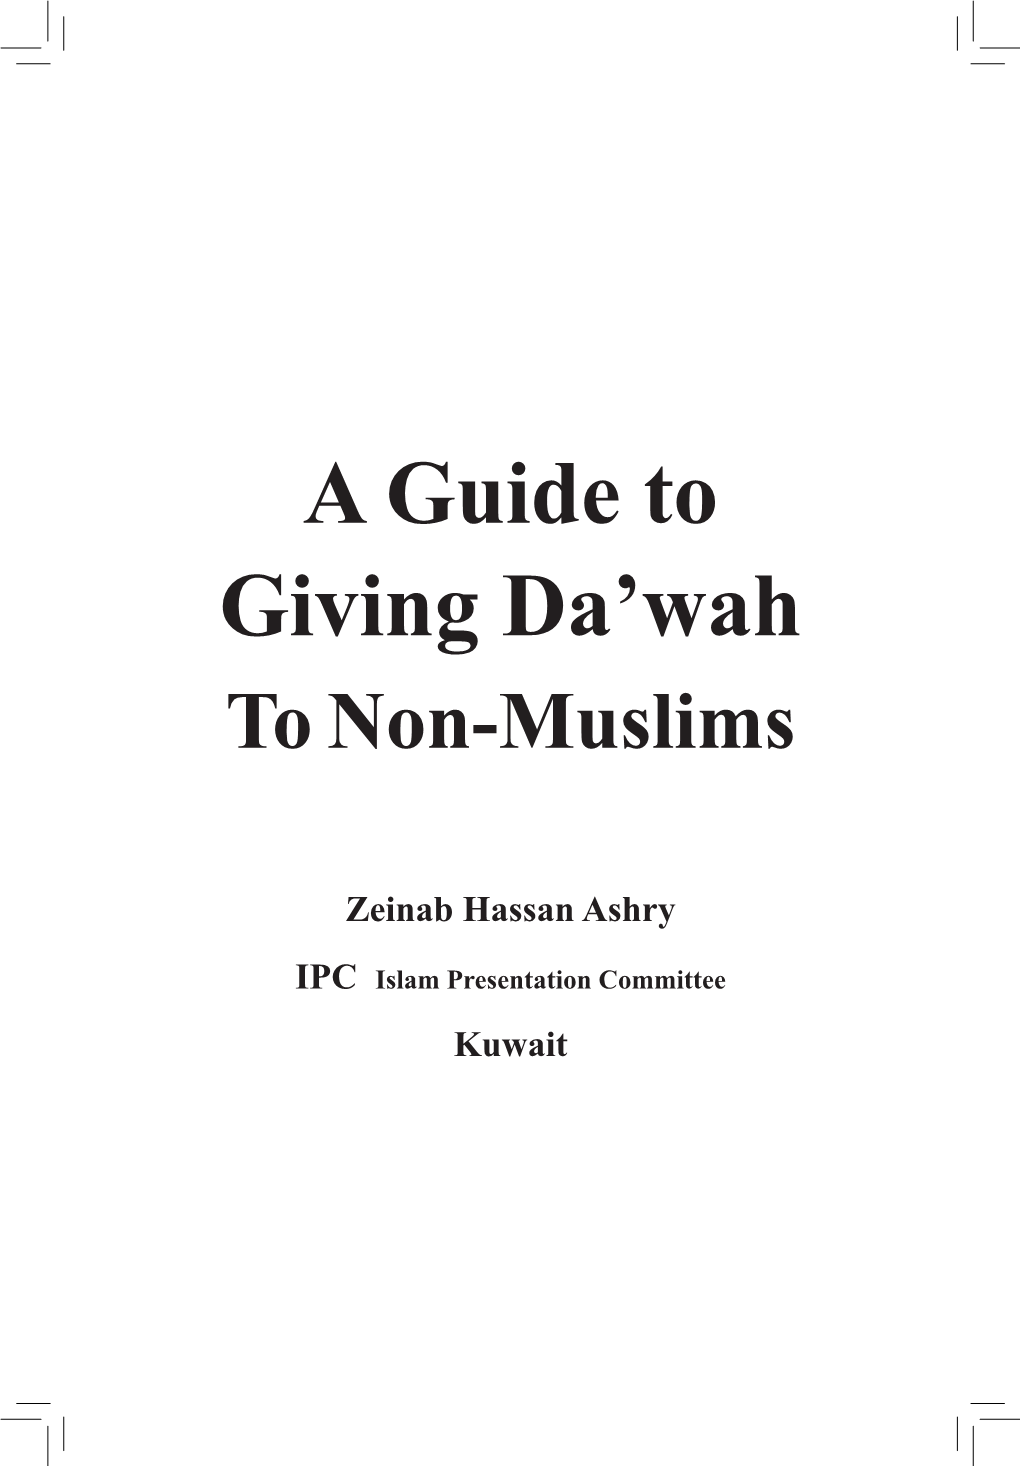 A Guide to Giving Da'wah to Non-Muslims